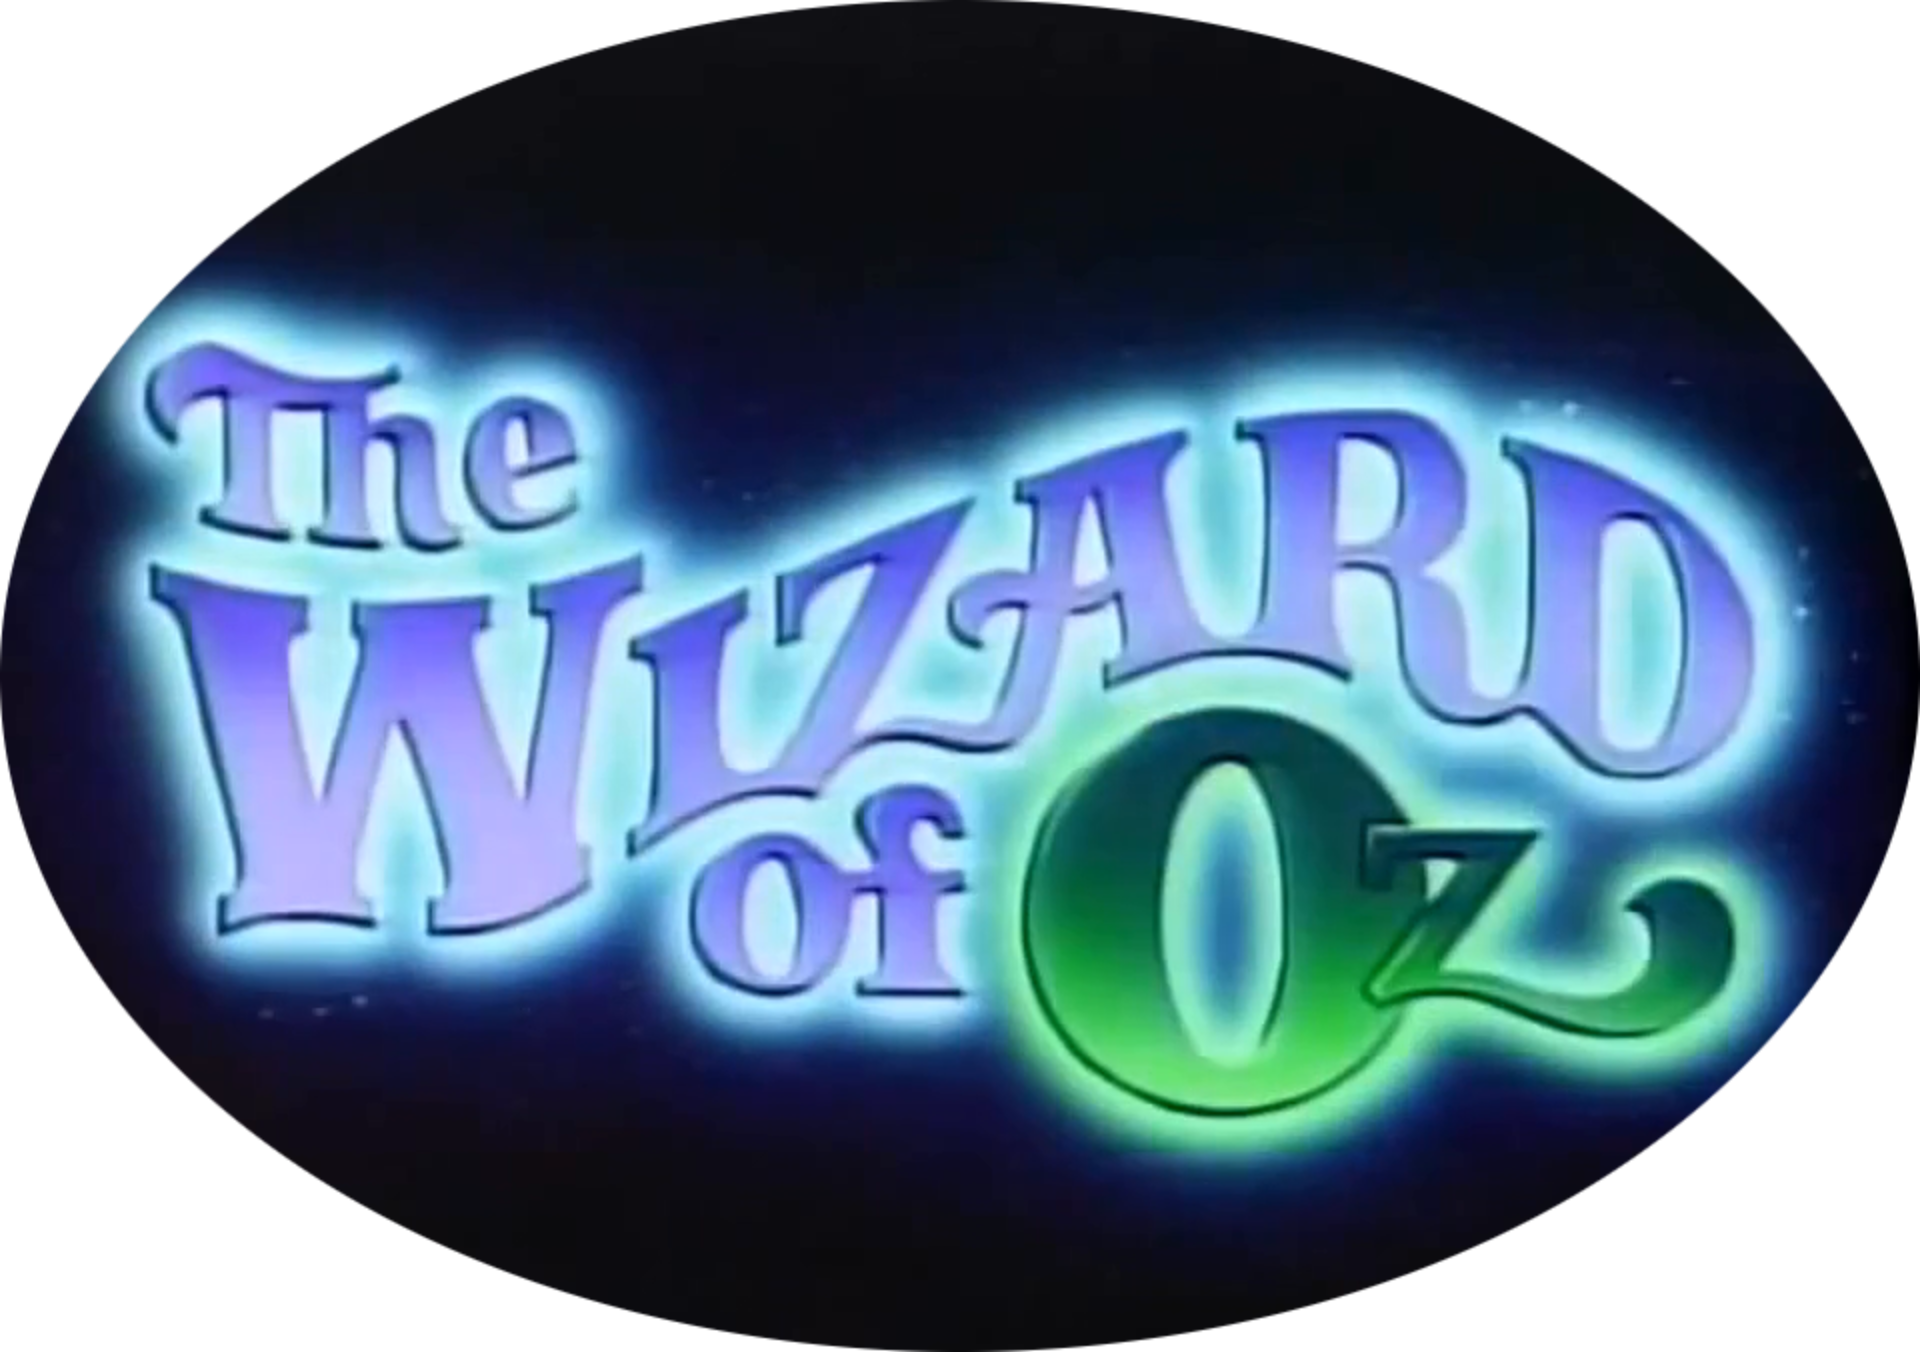 The Wizard of Oz Complete 